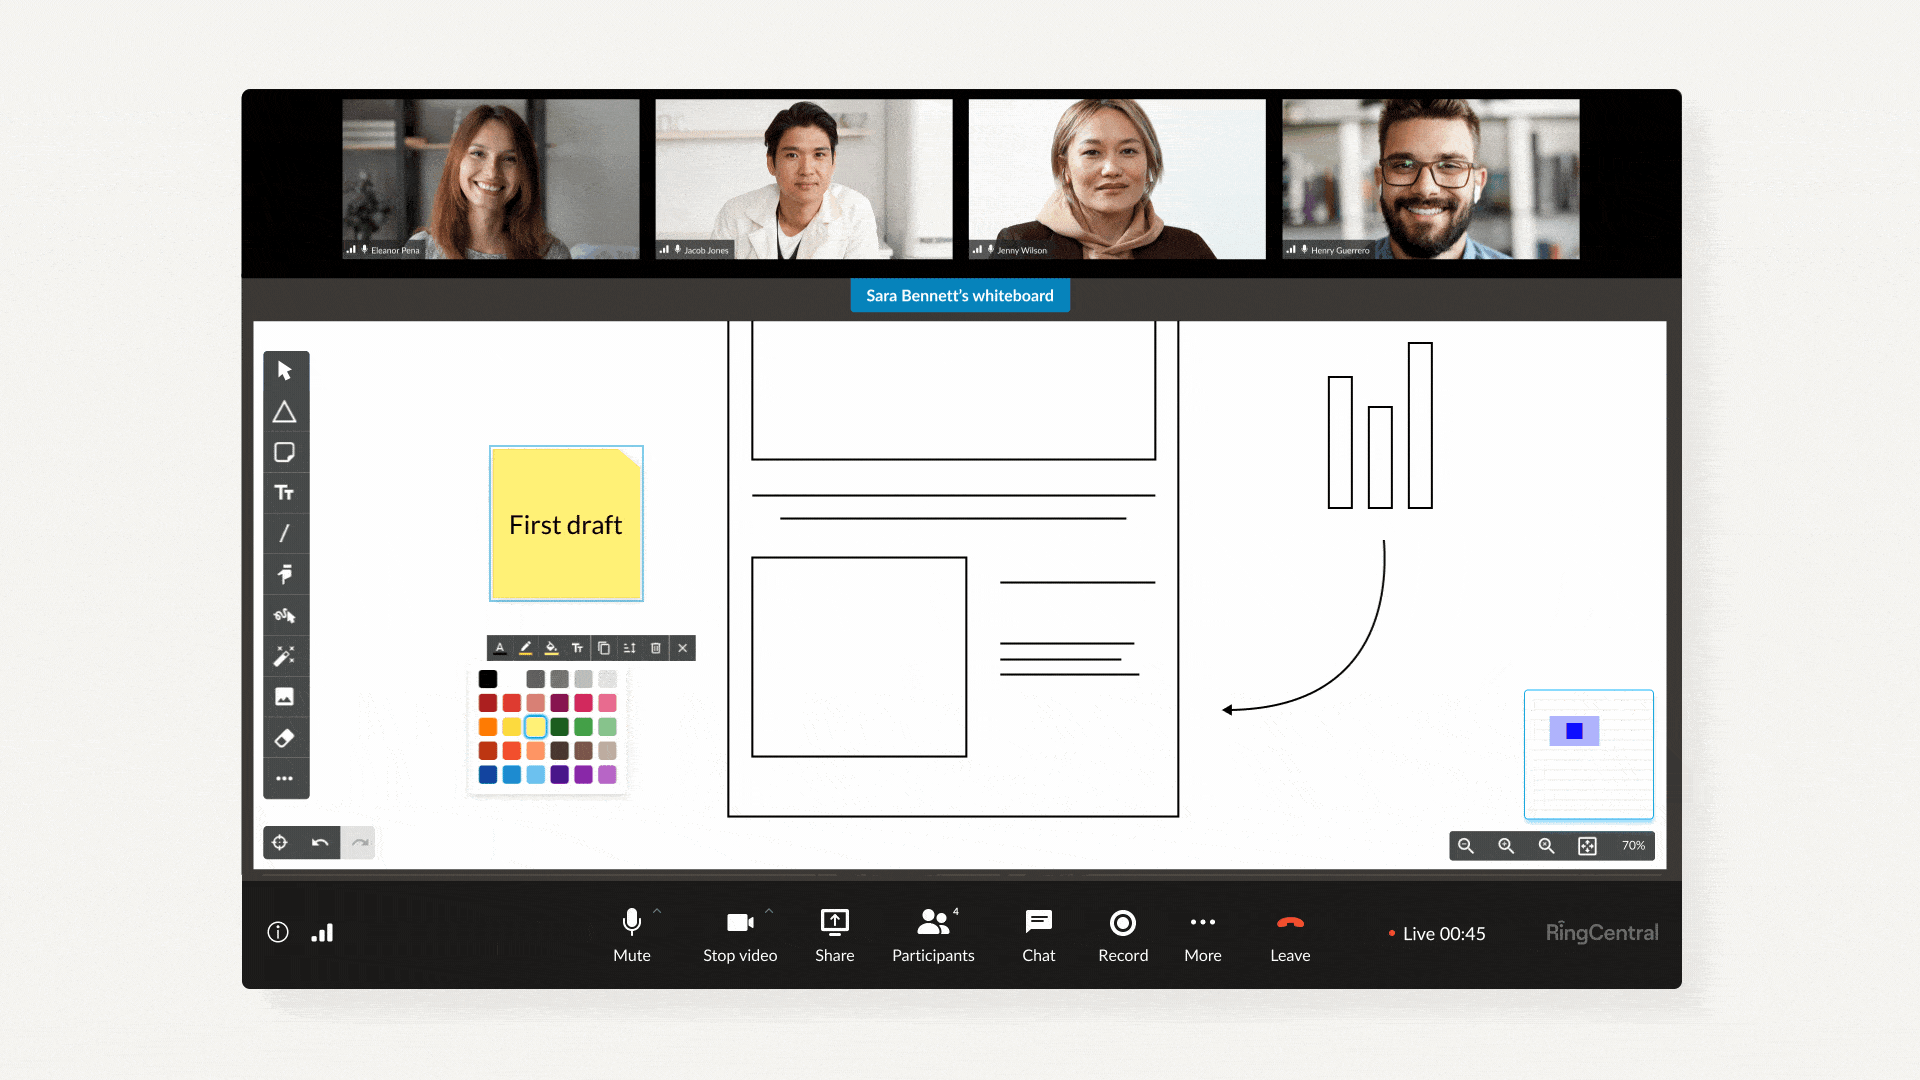 Video showing RingCentral Whiteboard tools